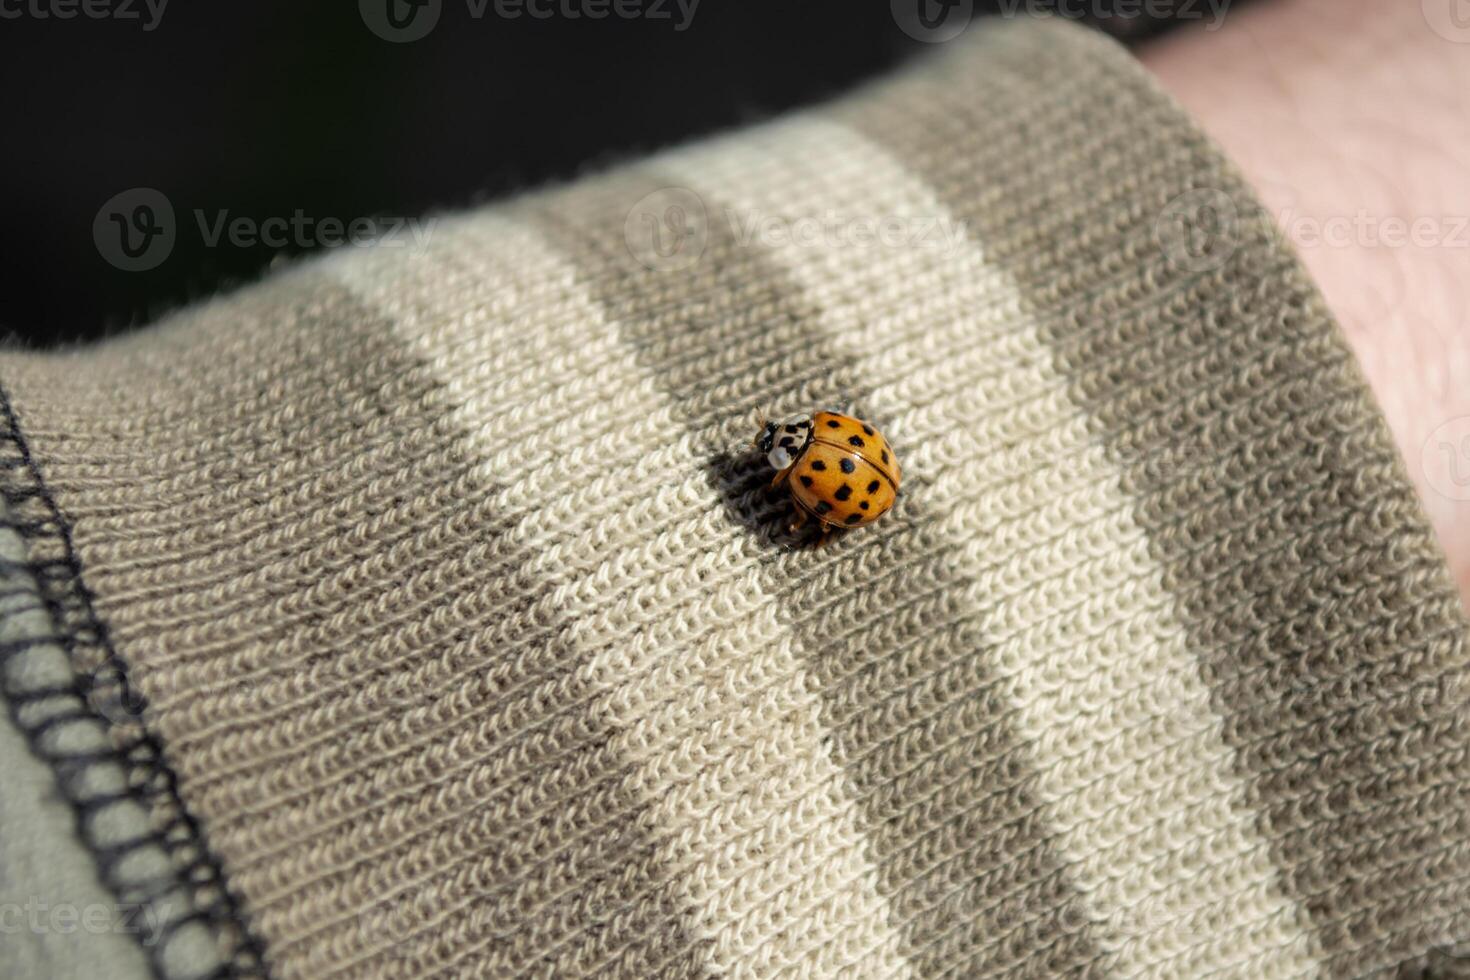 A small ladybug on the cuff of a sports jacket. photo